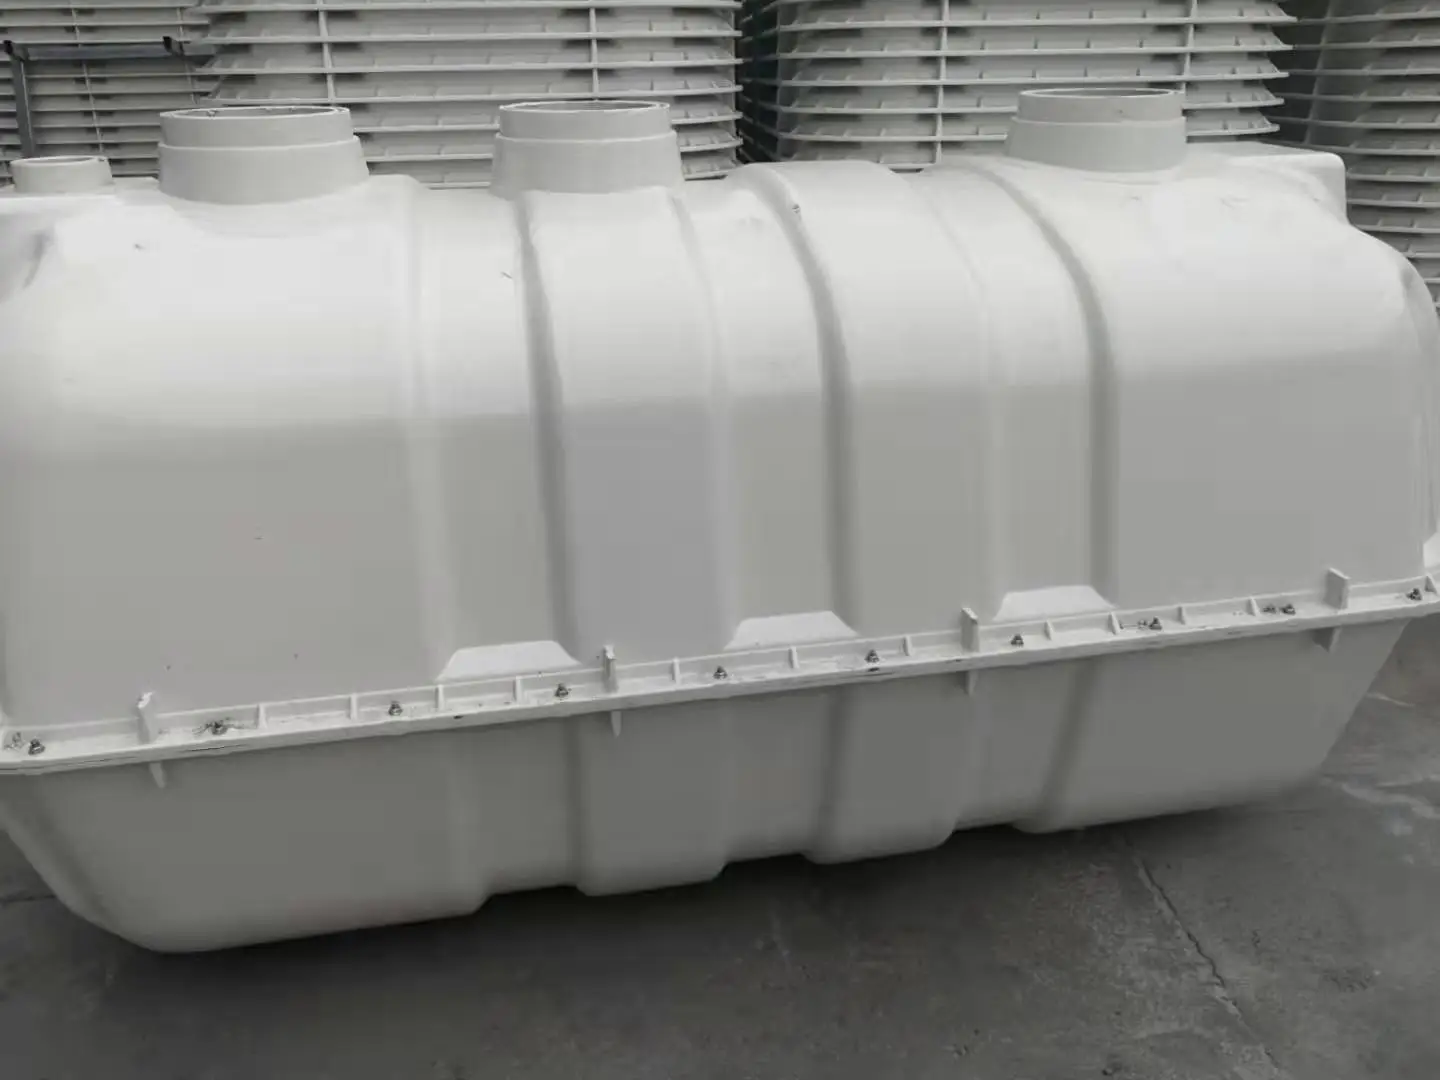 Underground glass fiber reinforced septic tank water saving toilet flushing system cubicle system